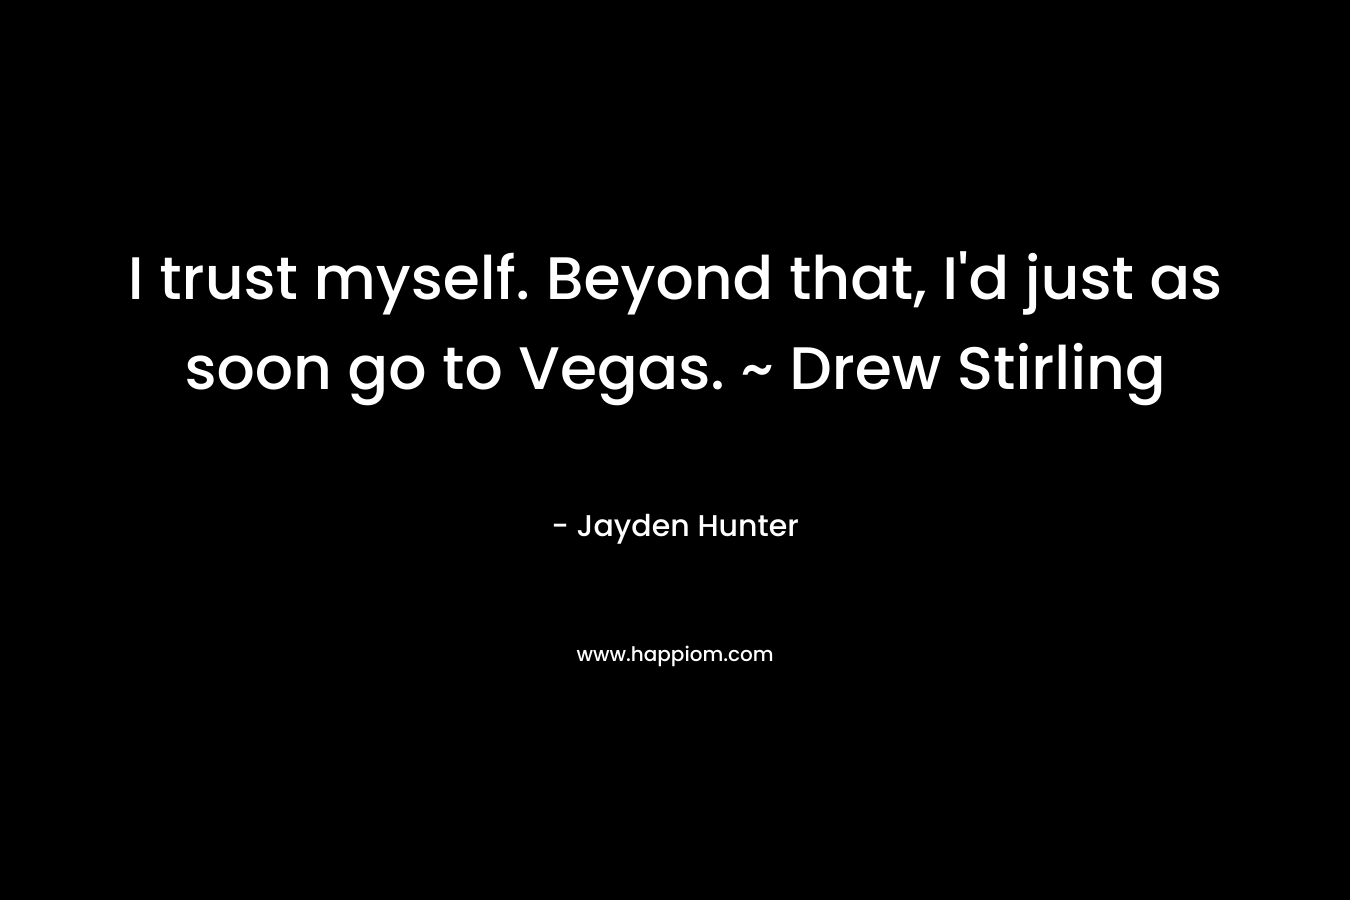 I trust myself. Beyond that, I'd just as soon go to Vegas. ~ Drew Stirling